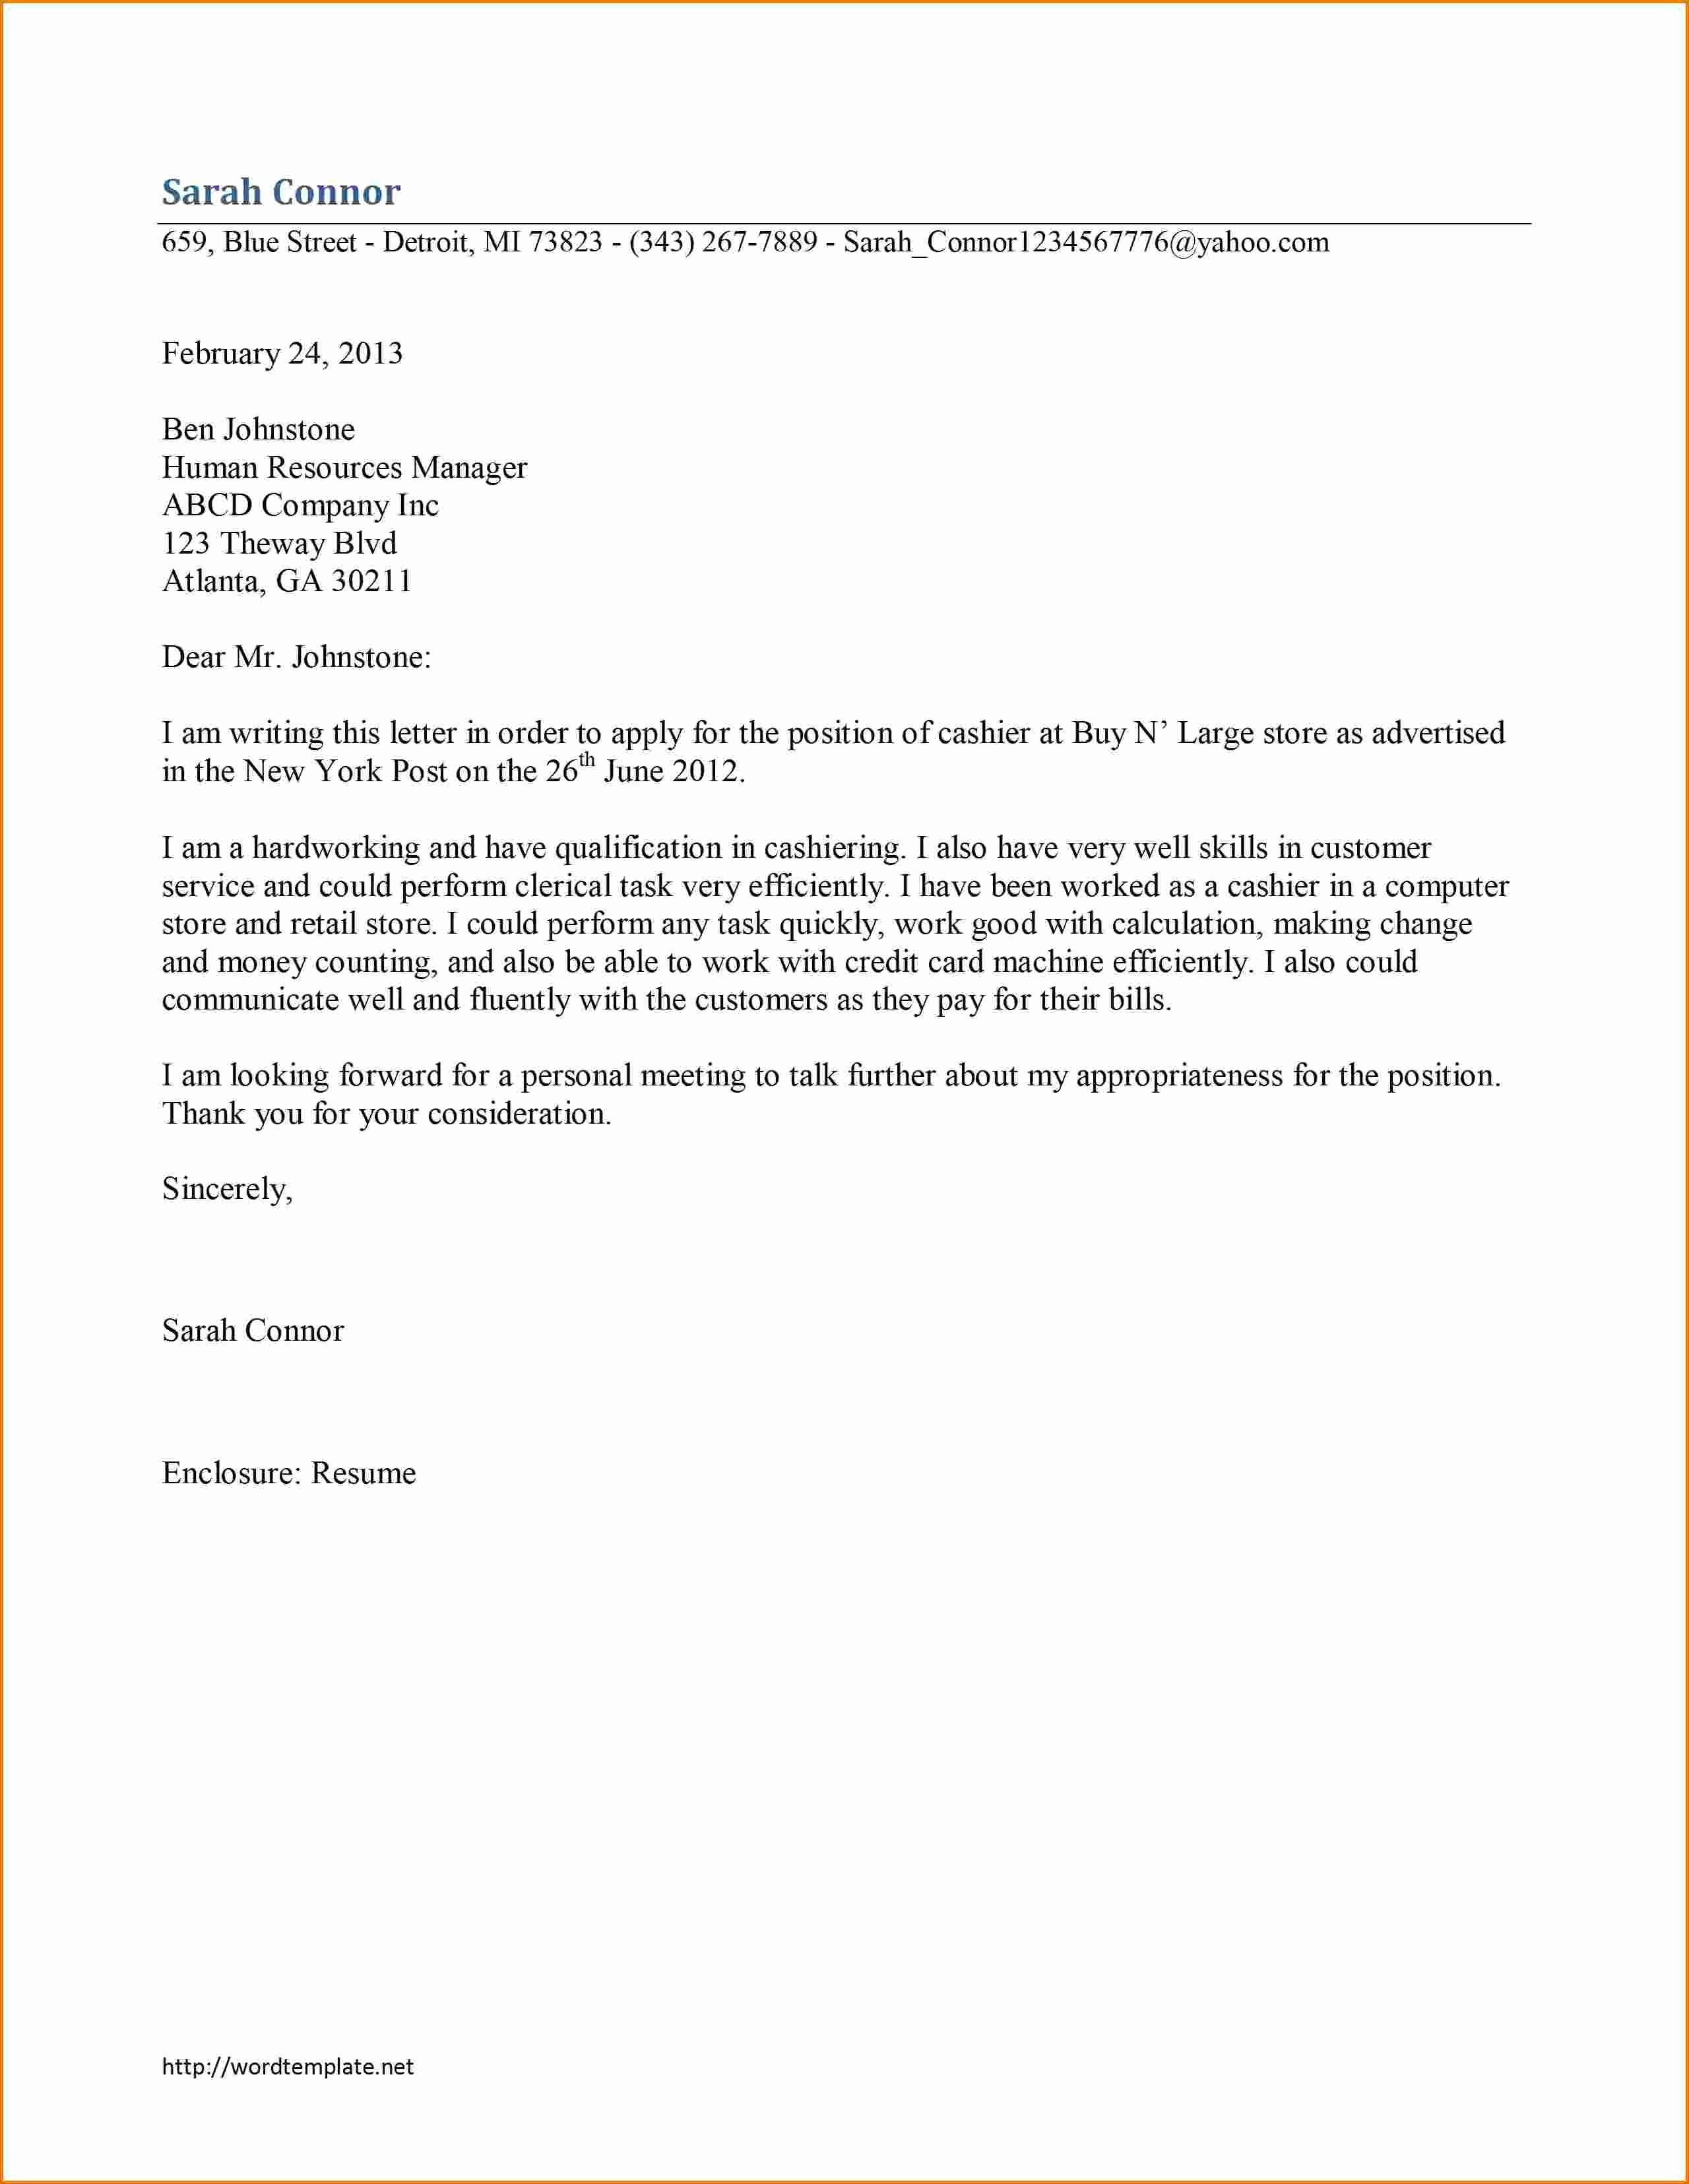 Creditor Cease and Desist Letter Template Collection Letter Template